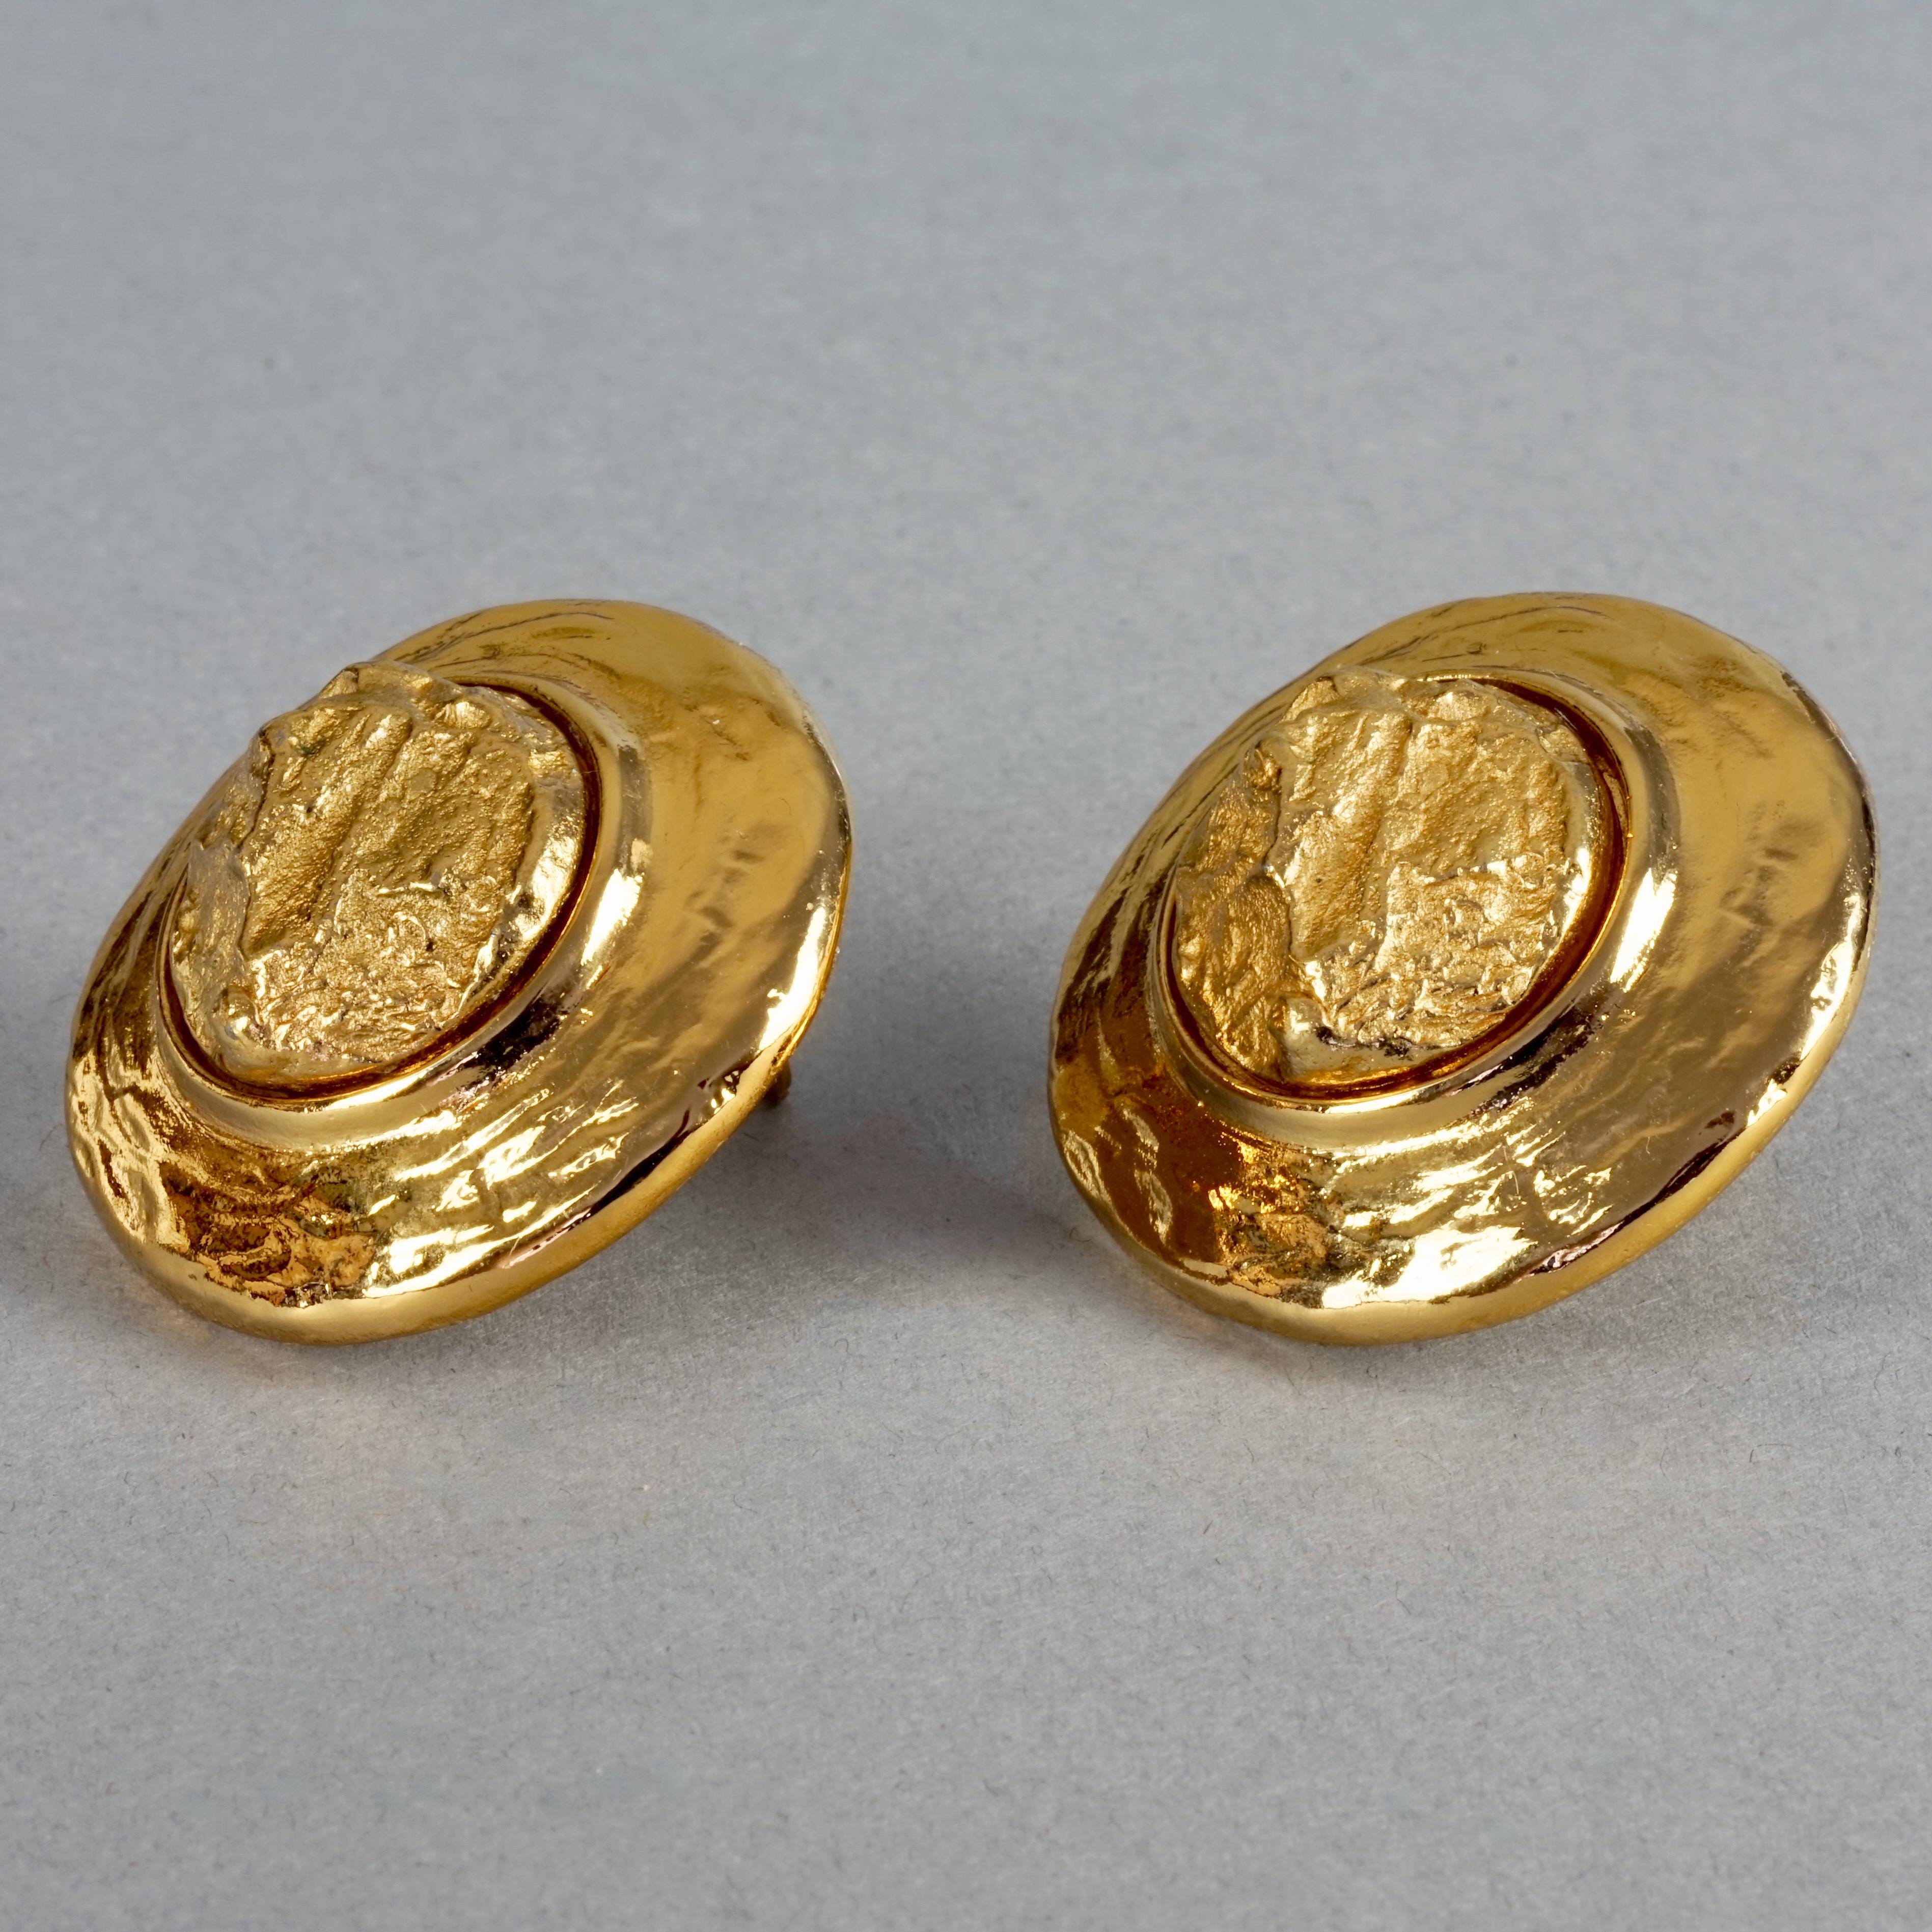 Vintage YVES SAINT LAURENT Ysl Textured Gold Round Earrings For Sale 2